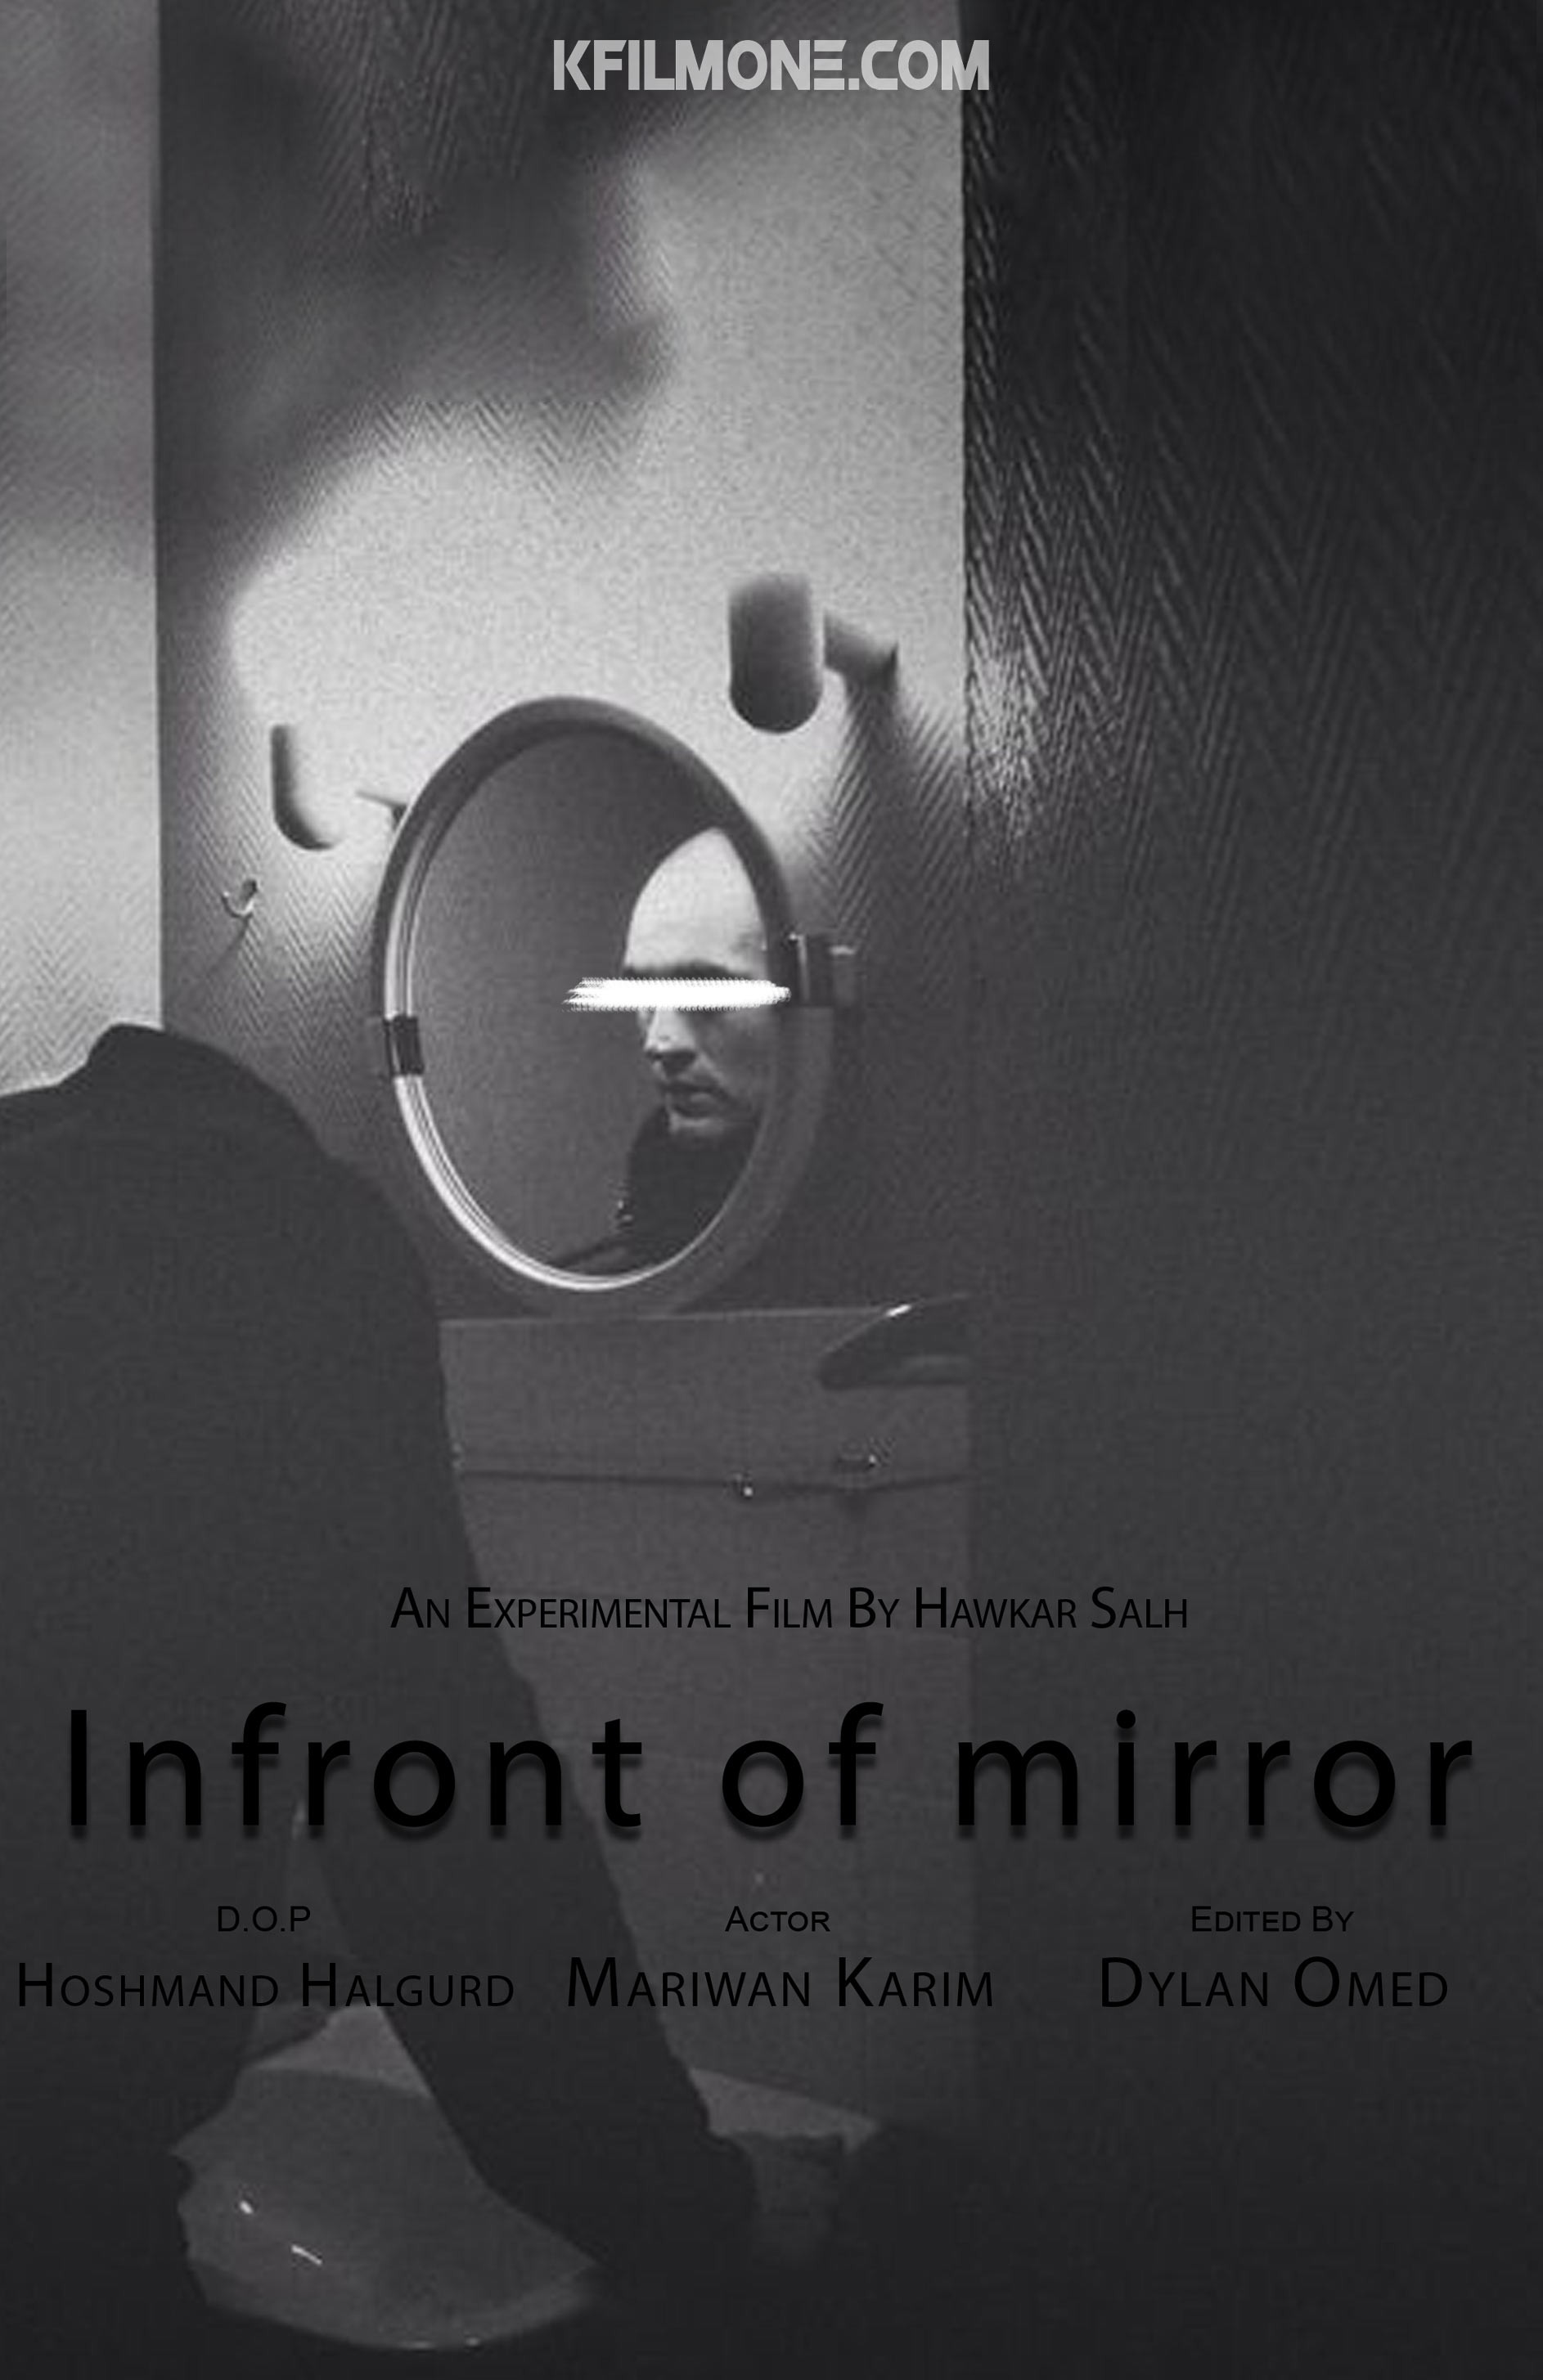 Infront of mirror